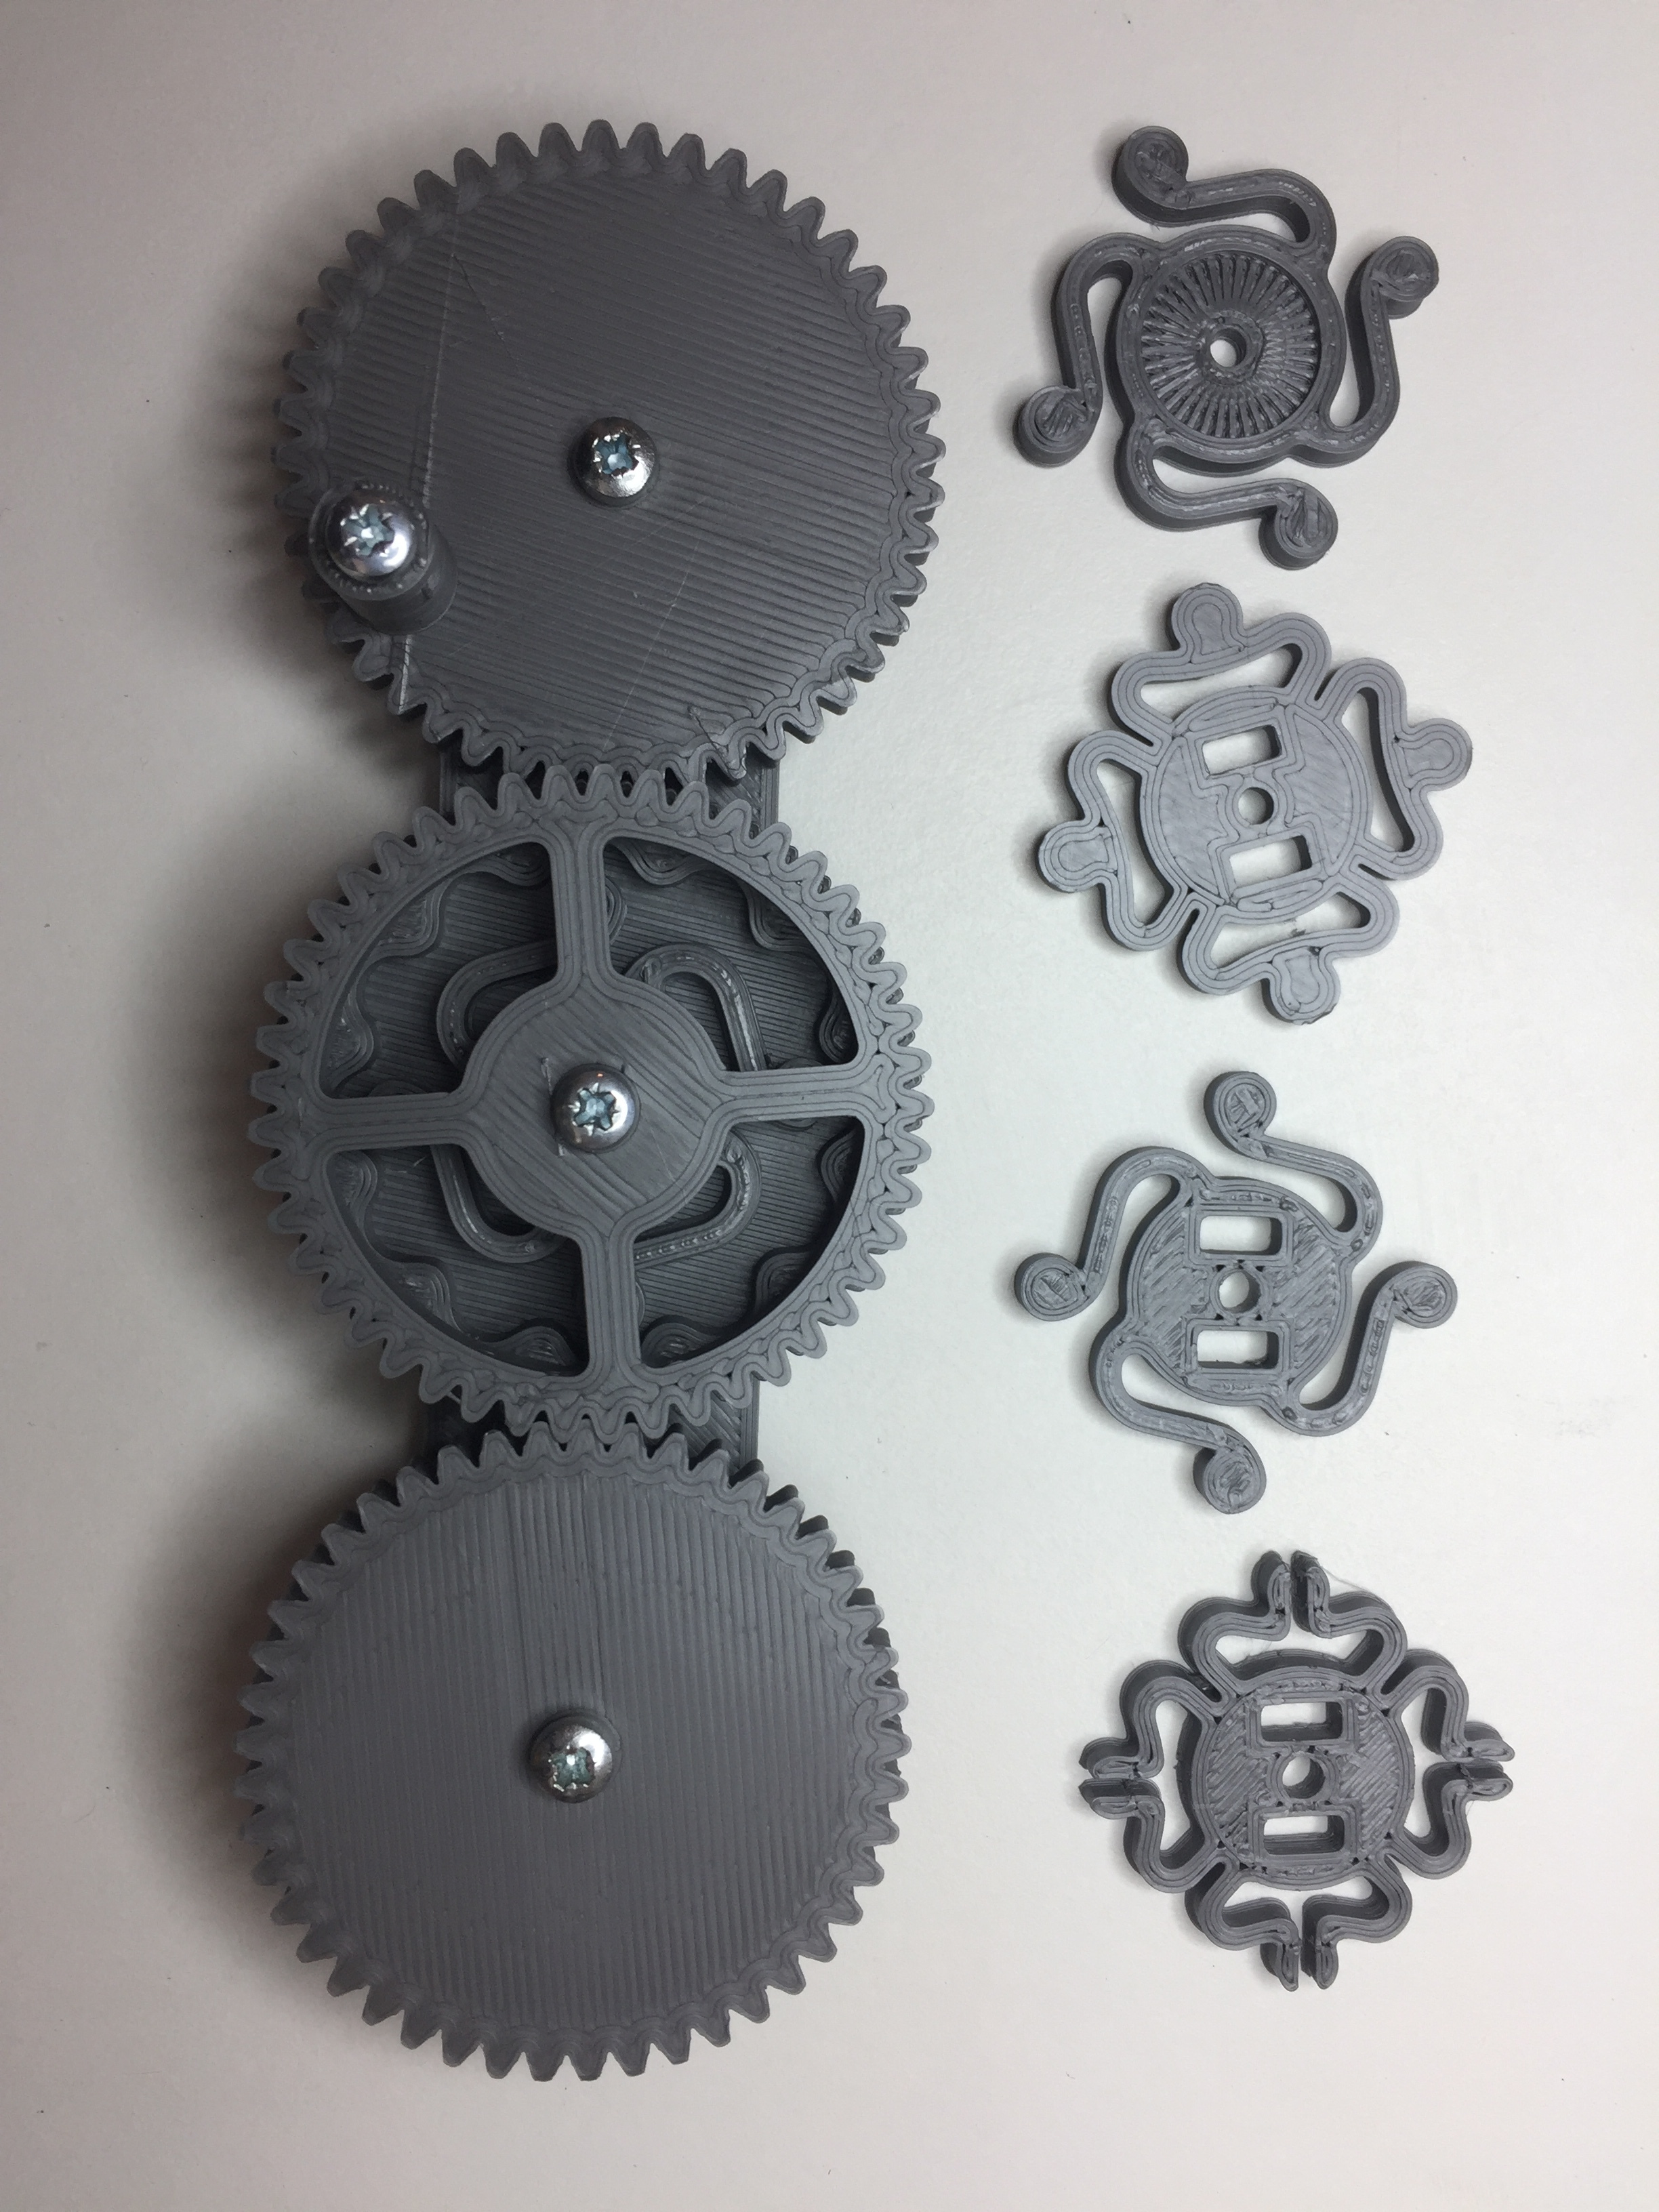 3D Printed Safety Ratched Gear by Ronald Jaramillo